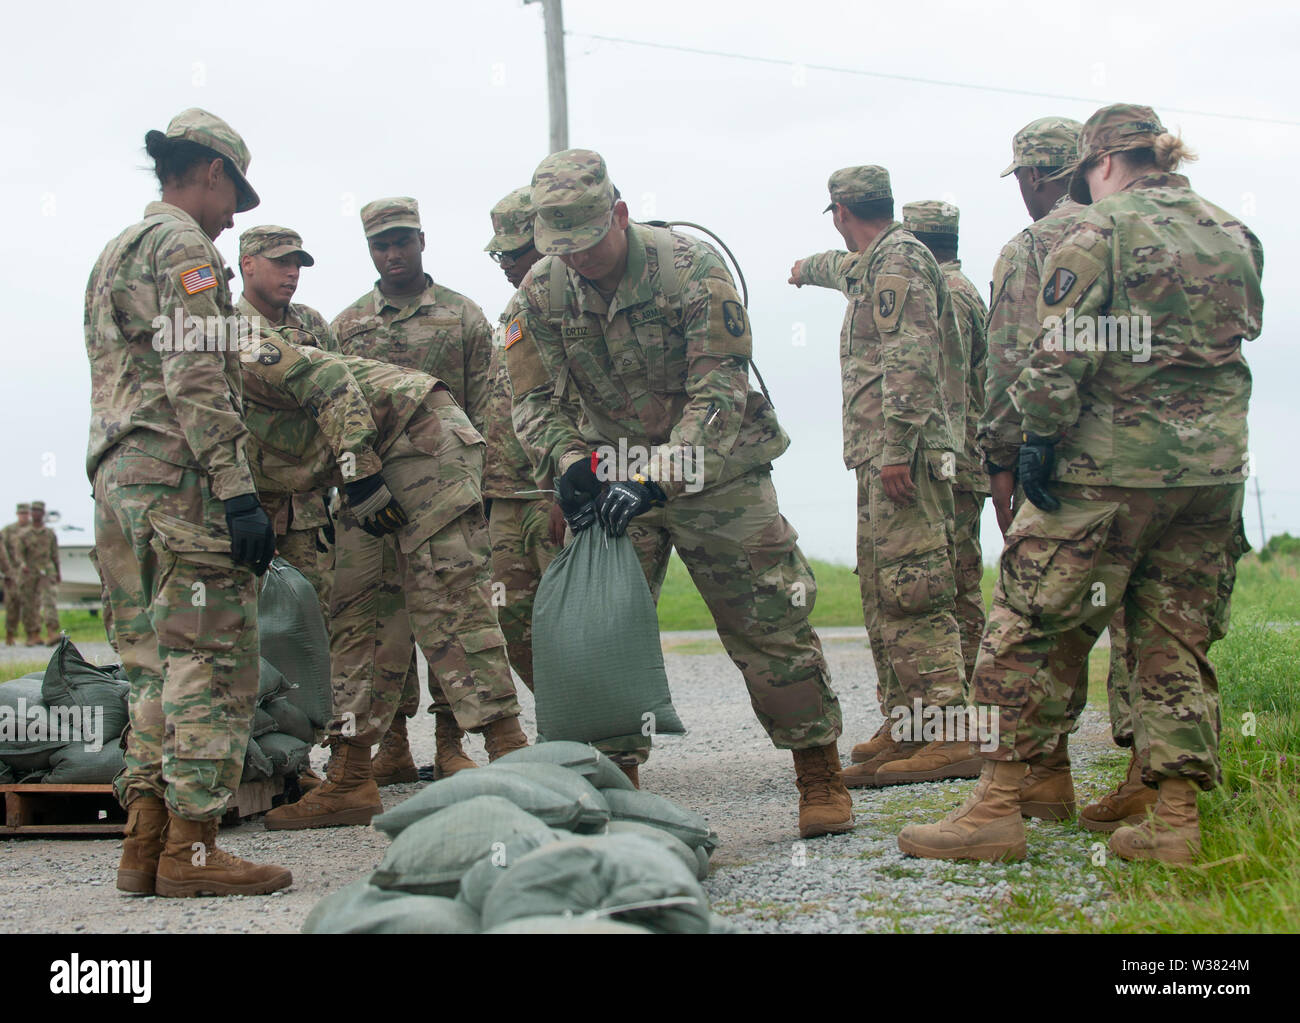 Army National Guard soldiers of the 2225 Multi-role Bridge Company fill sandbags at a Marina near and do other prep work.New Orleans and other parts of the Gulf of Mexico prepare for the Tropical Storm Barry to make landfall, bringing with it a catastrophic rainfall. With the Mississippi River's water level at an all-time high and a storm forming in the Gulf of Mexico that is expected to make landfall on the Louisiana and Texas coasts, many fear that levees will fail and that New Orleans will again be inundated as bad as it was in the 2004 aftermath of Hurricane Kartina. Stock Photo